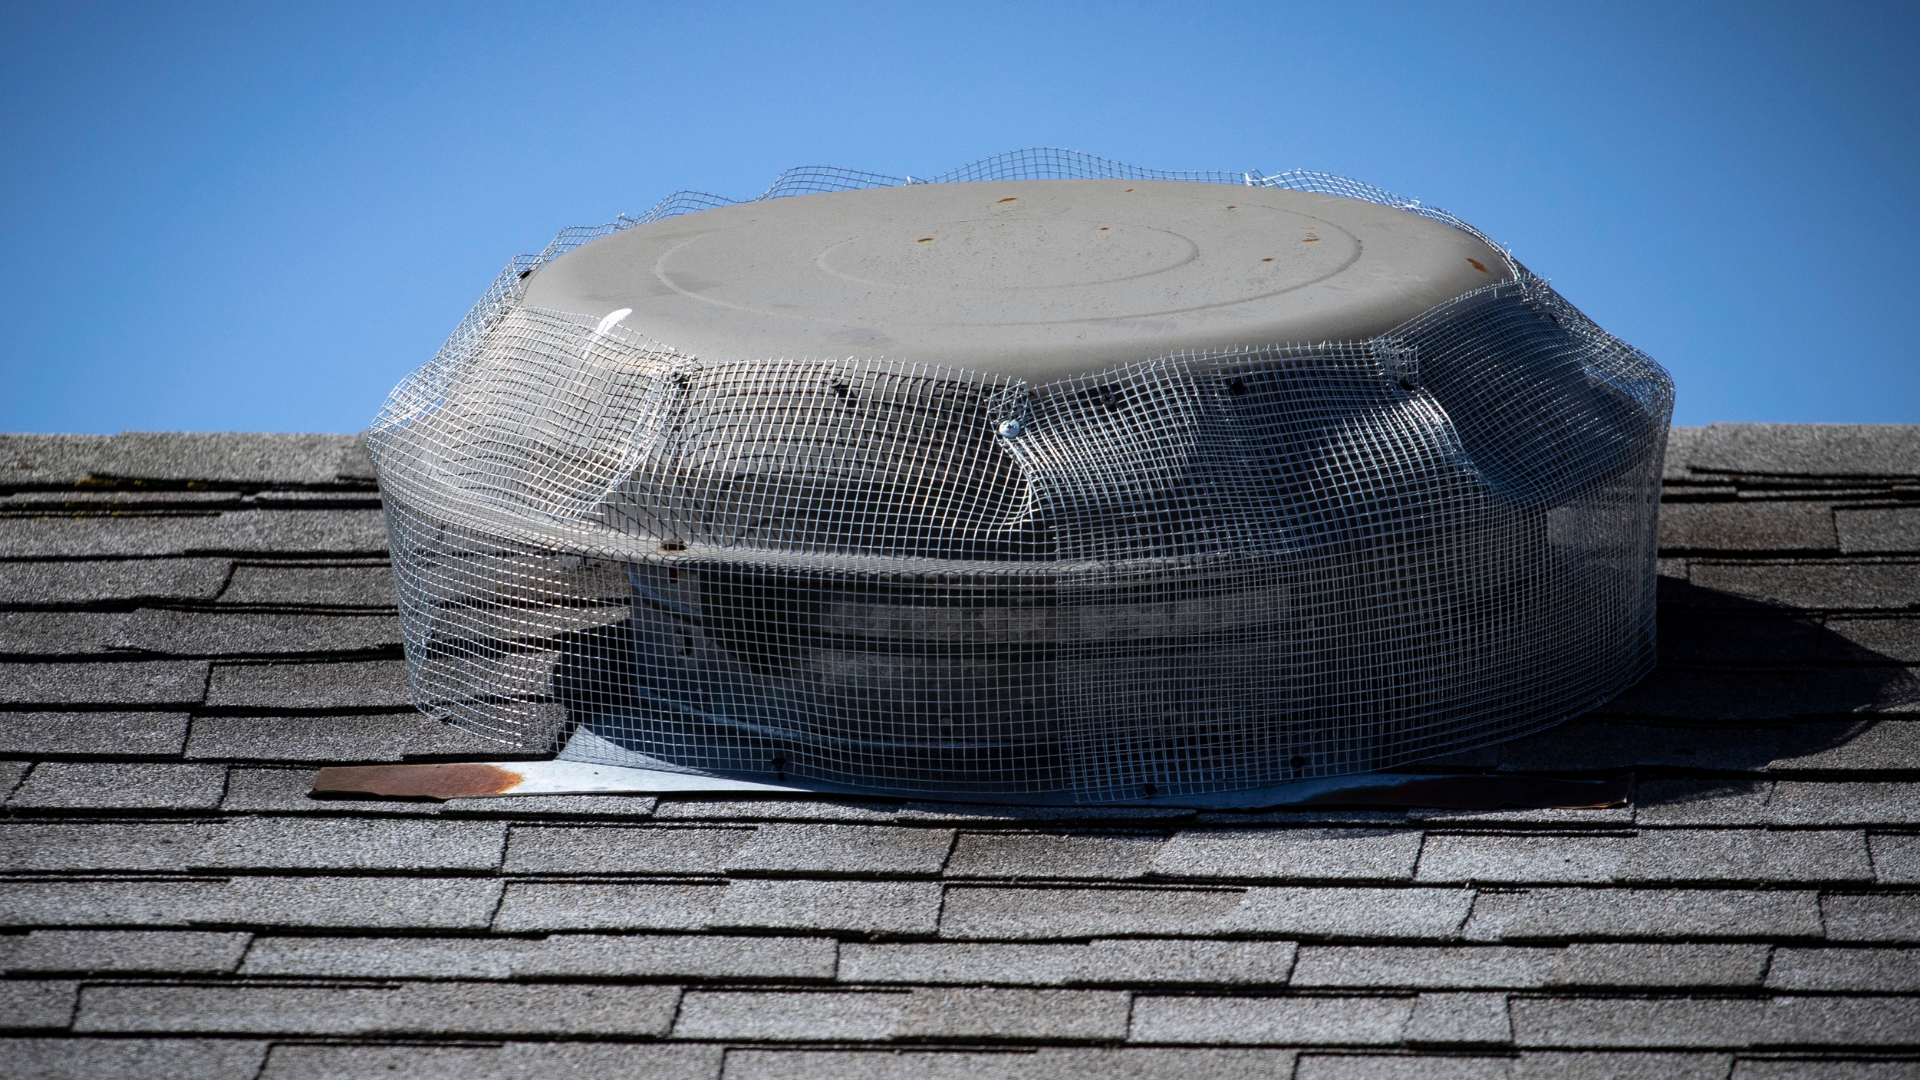 Wire mesh installed on roof top attic fan to prevent rodent entry to home/attic.